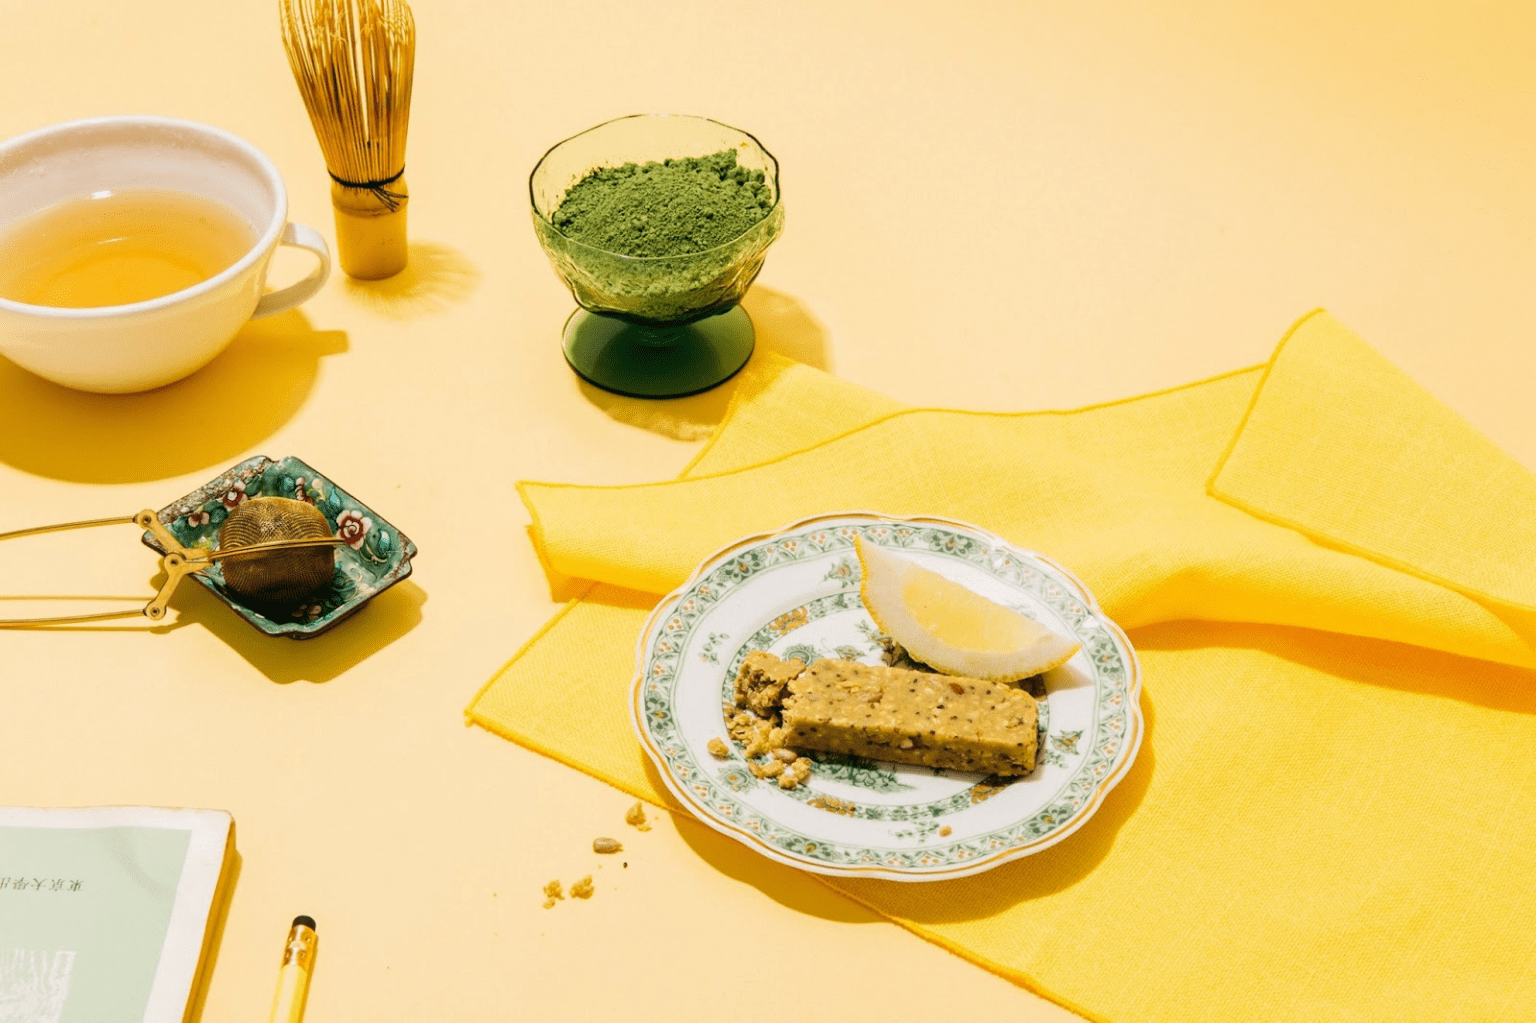 Dang Foods lemon snack bar sits on a plate surrounded by yellow elements such as tablecloths and tea. There is also matcha and a matcha whisk next to this organic snack.